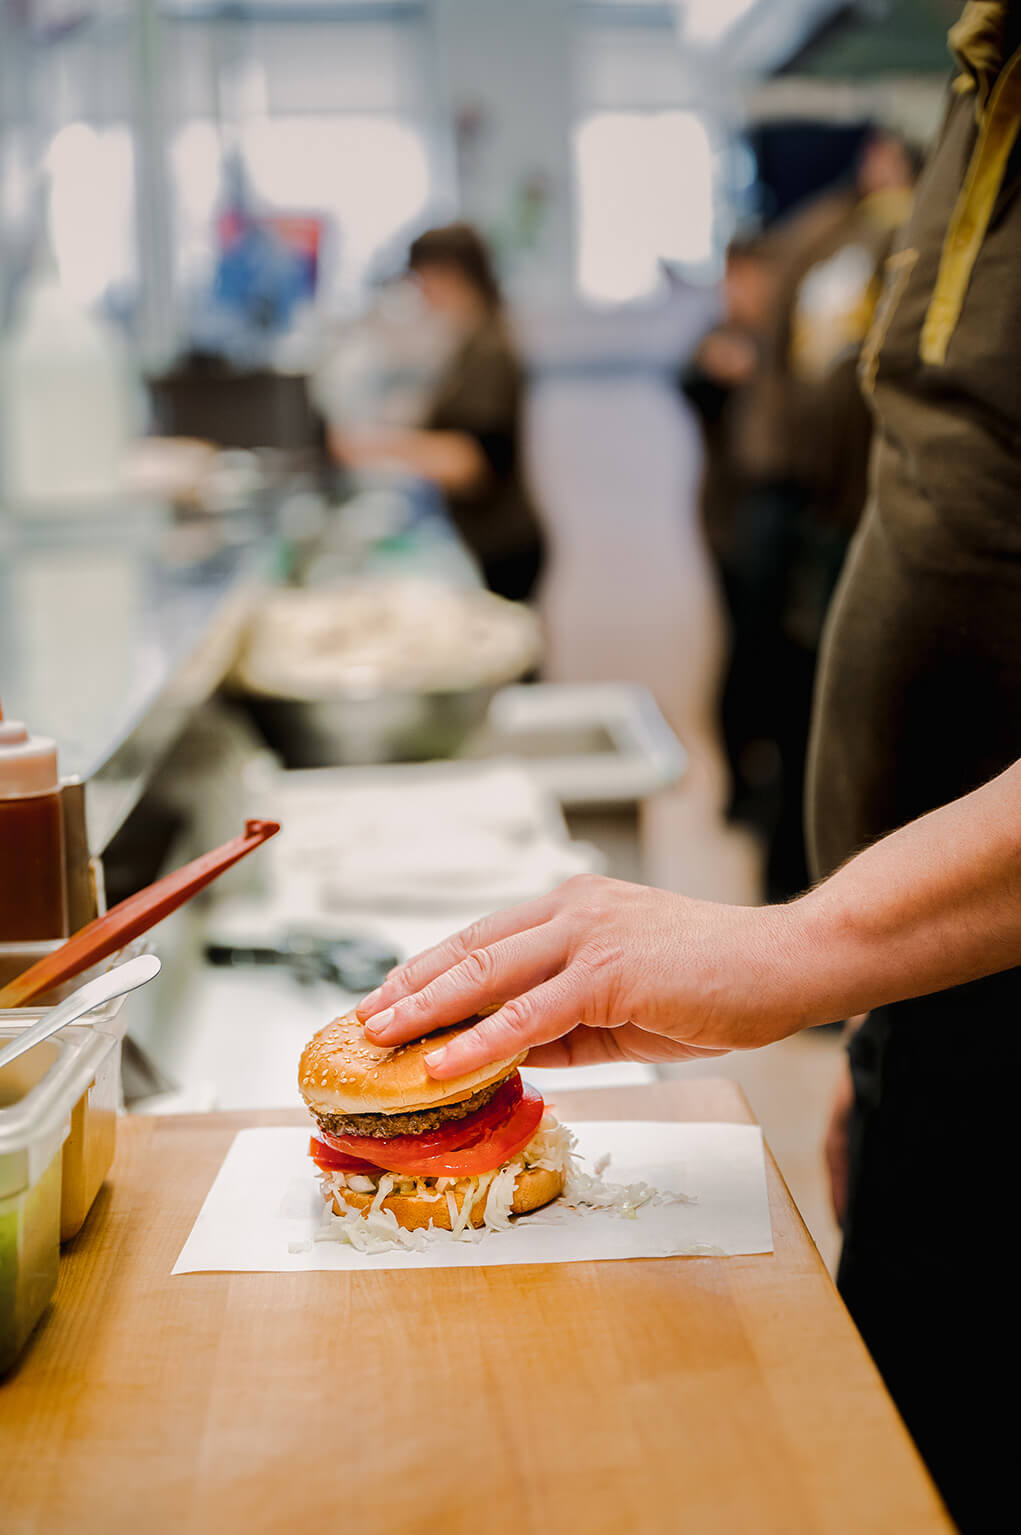 A hand making a burger with meat, lettuce in a fast-food restaurant kitchen